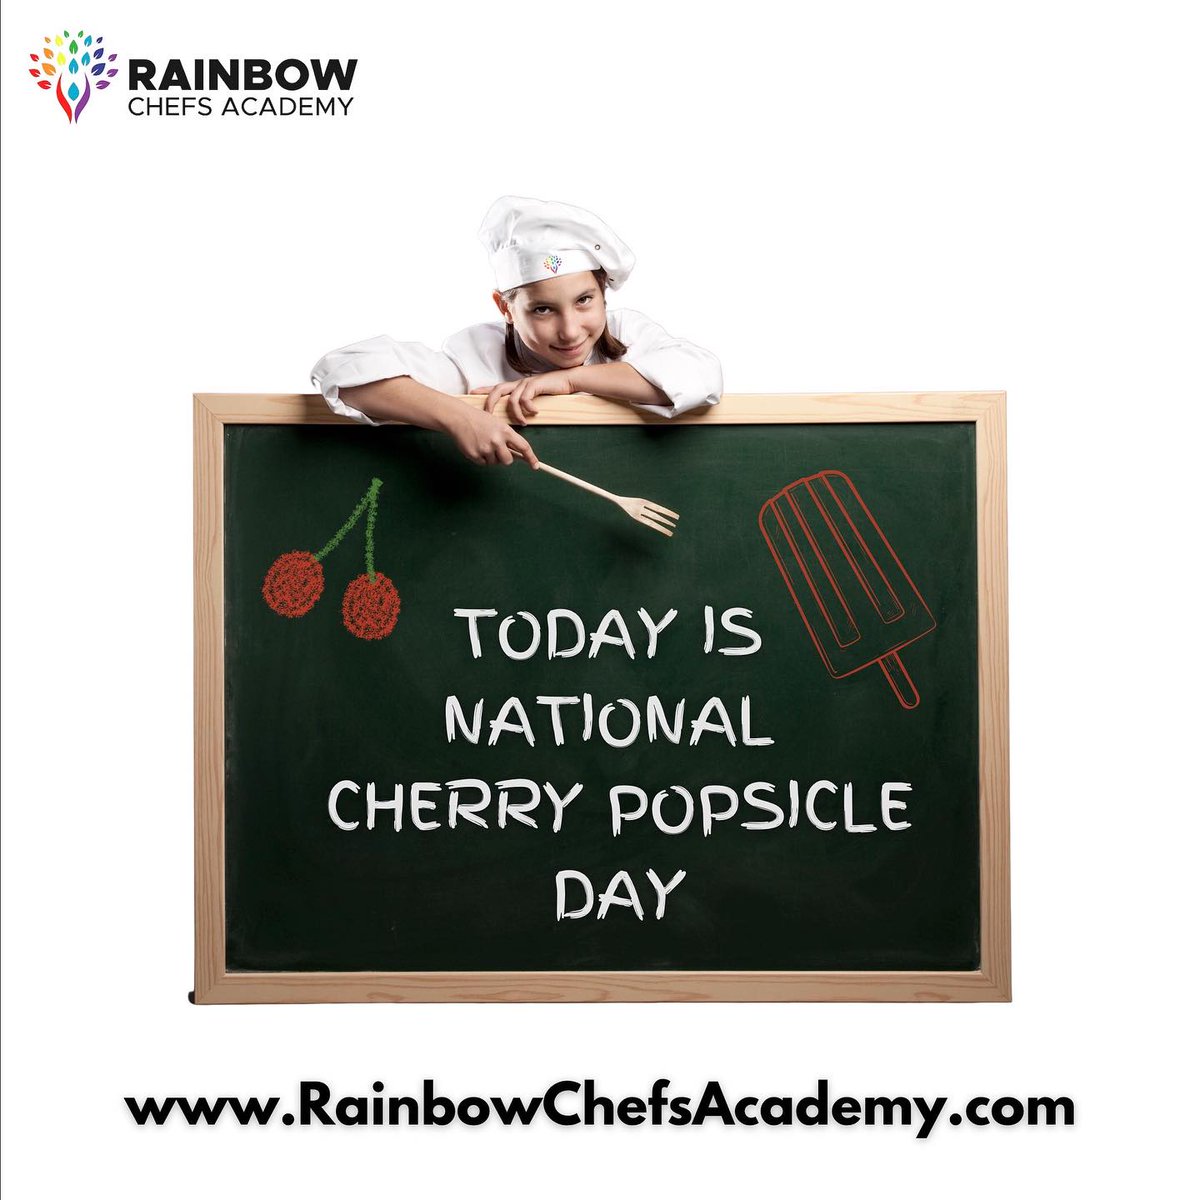 🍒🌈 Celebrate #NationalCherryPopsicleDay with Rainbow Chefs Academy! ⁣  

See post below for a delicious and healthy recipe using only three ingredients!   

EDUCATE. EMPOWER. EAT. ⁣⁣ 

🌈❤️⁣🍒

#CherryPopsicleDay #HealthyTreats 
#SummerSnacks #RainbowChefsAcademy